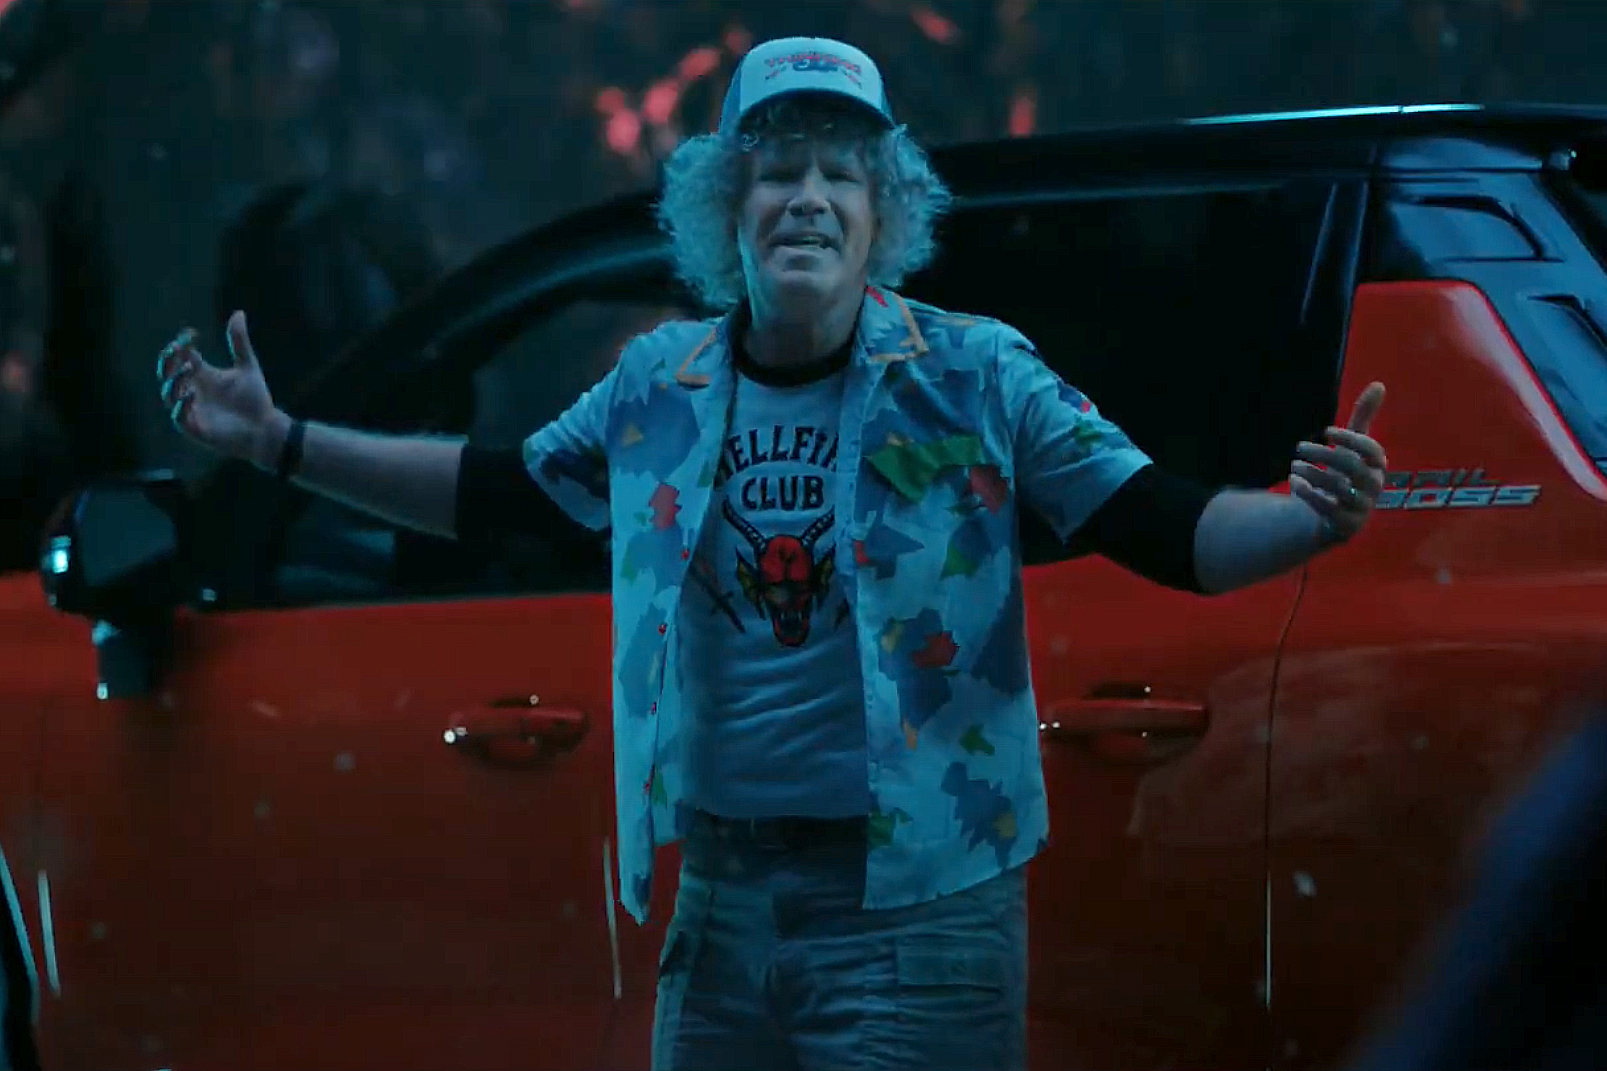 GM’s Super Bowl ad puts Will Ferrell and EVs in Netflix shows